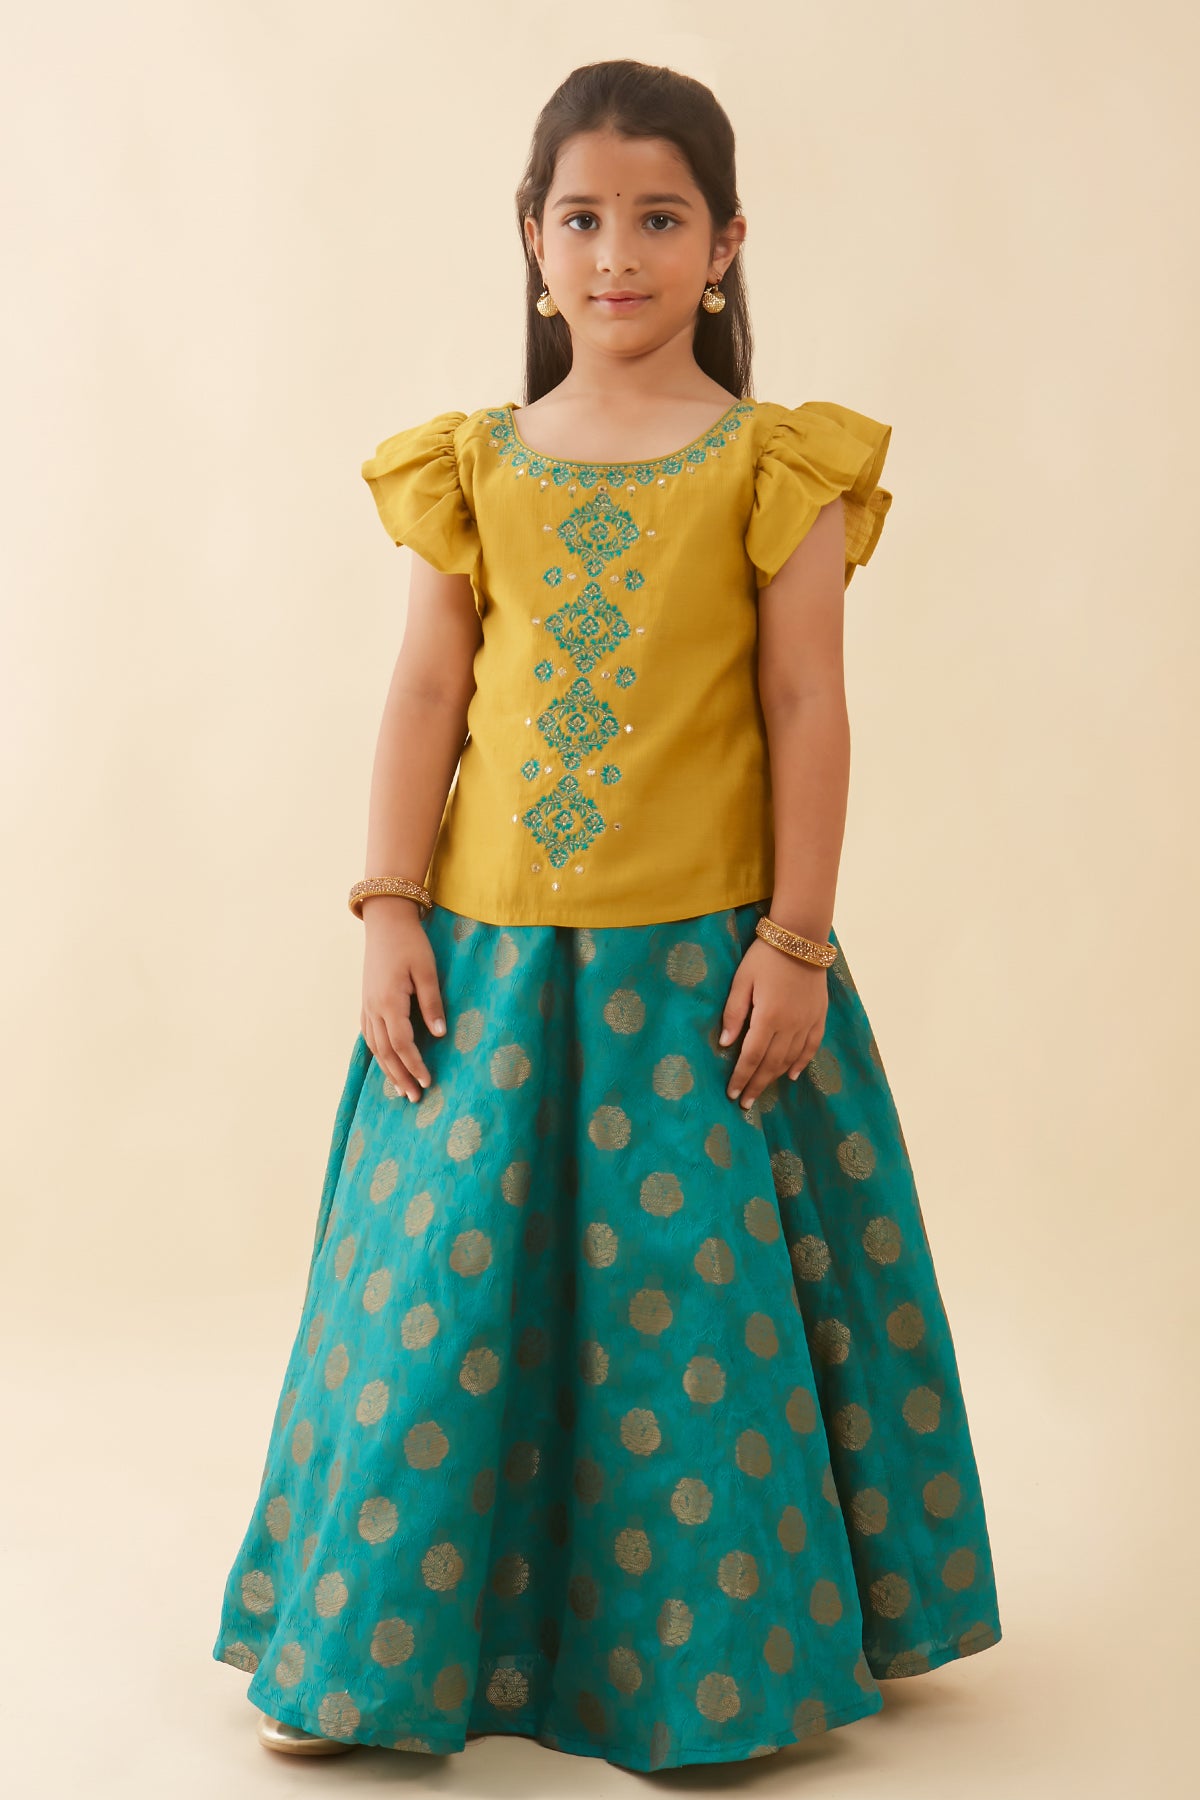 Brocade Skirt With Contrast Floral Embroidered Kids Skirt Set - Mustard & Green